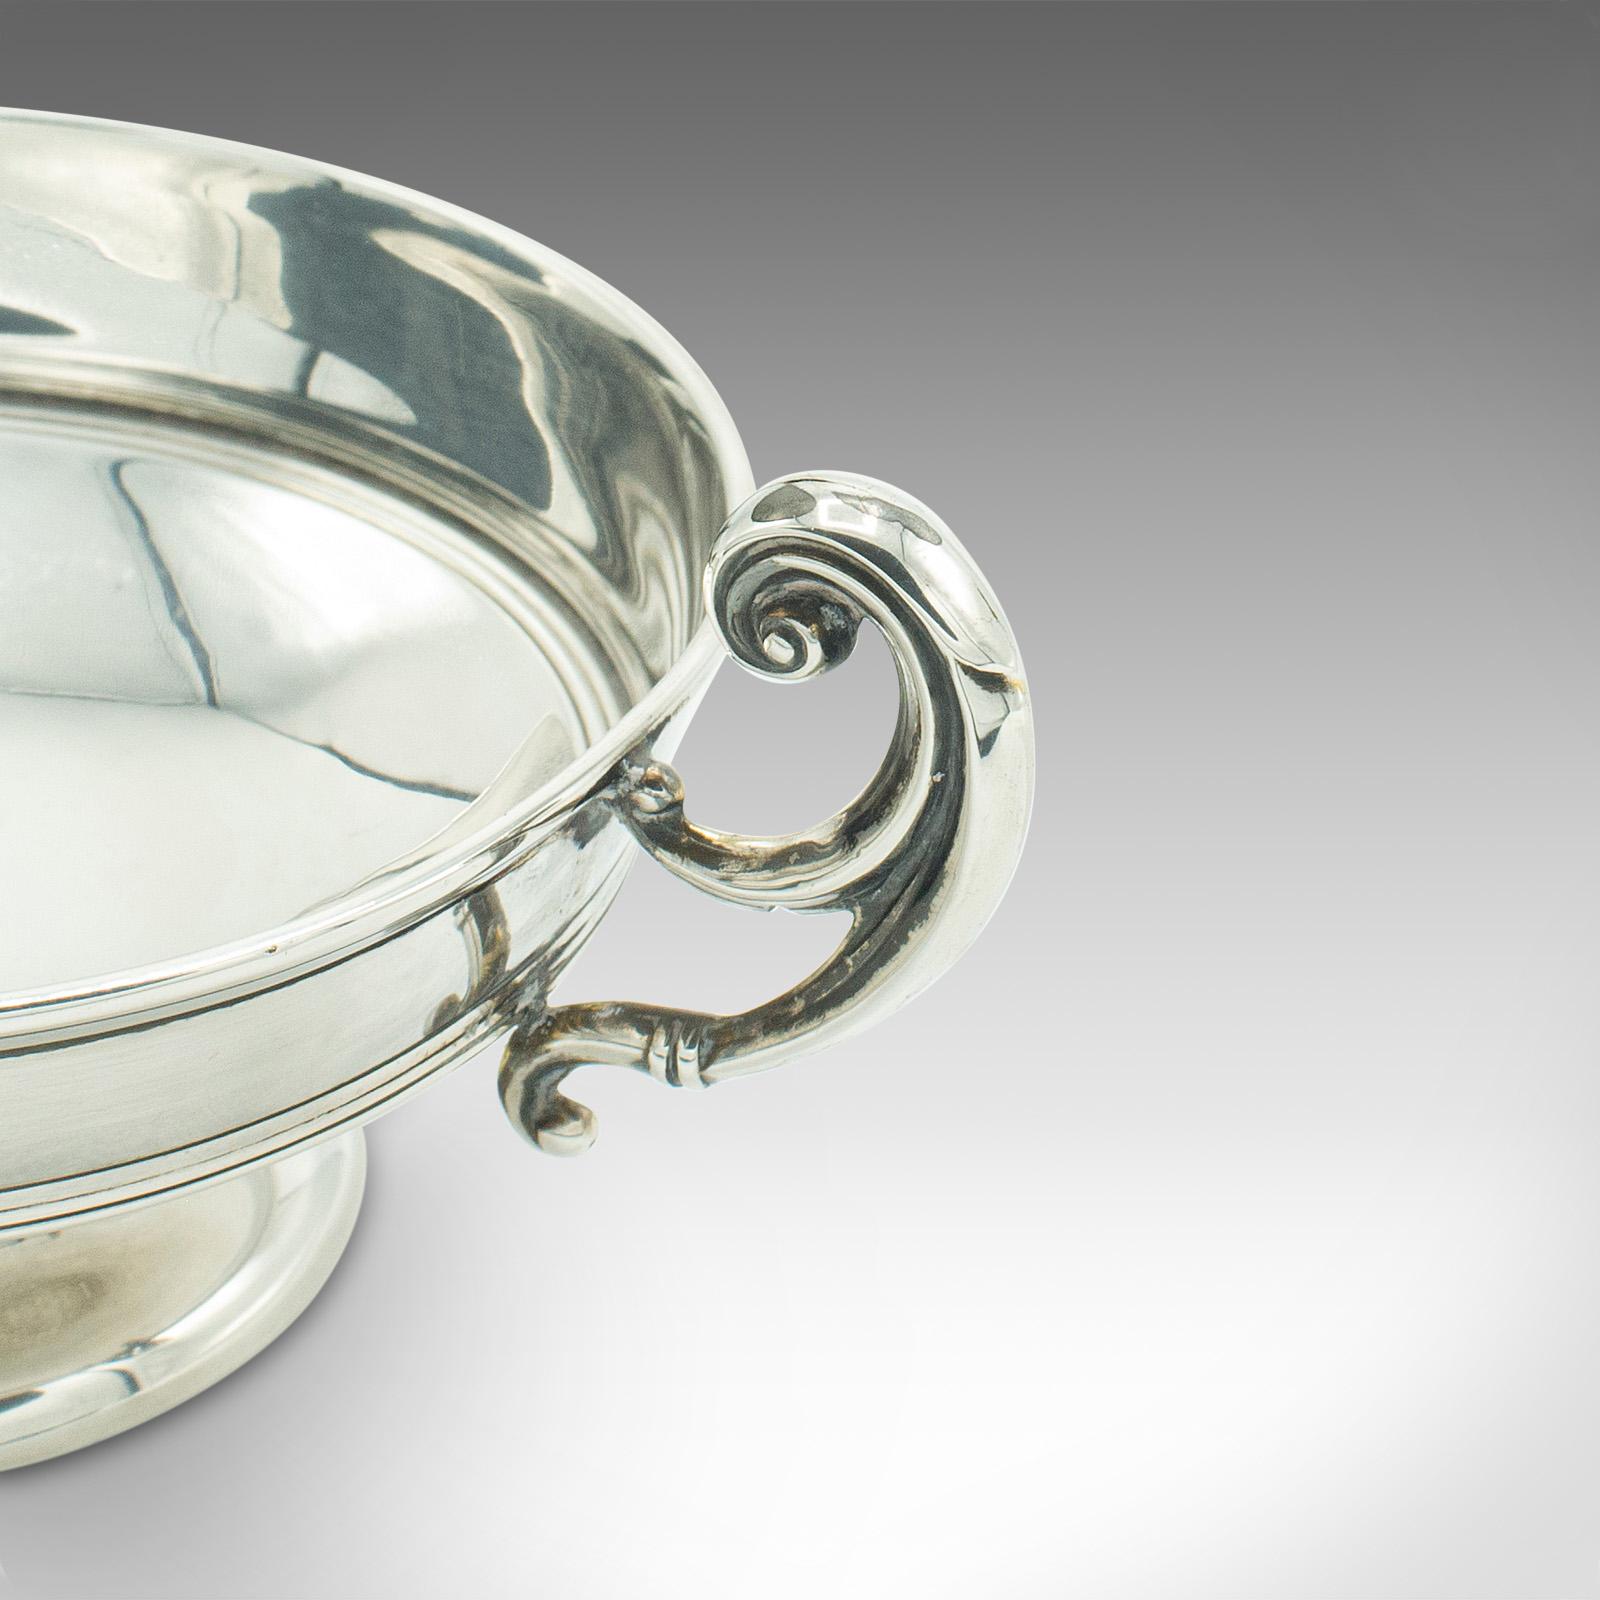 Pair of Antique Bonbon Dishes, English, Sterling Silver, Serving Bowl, Edwardian For Sale 2